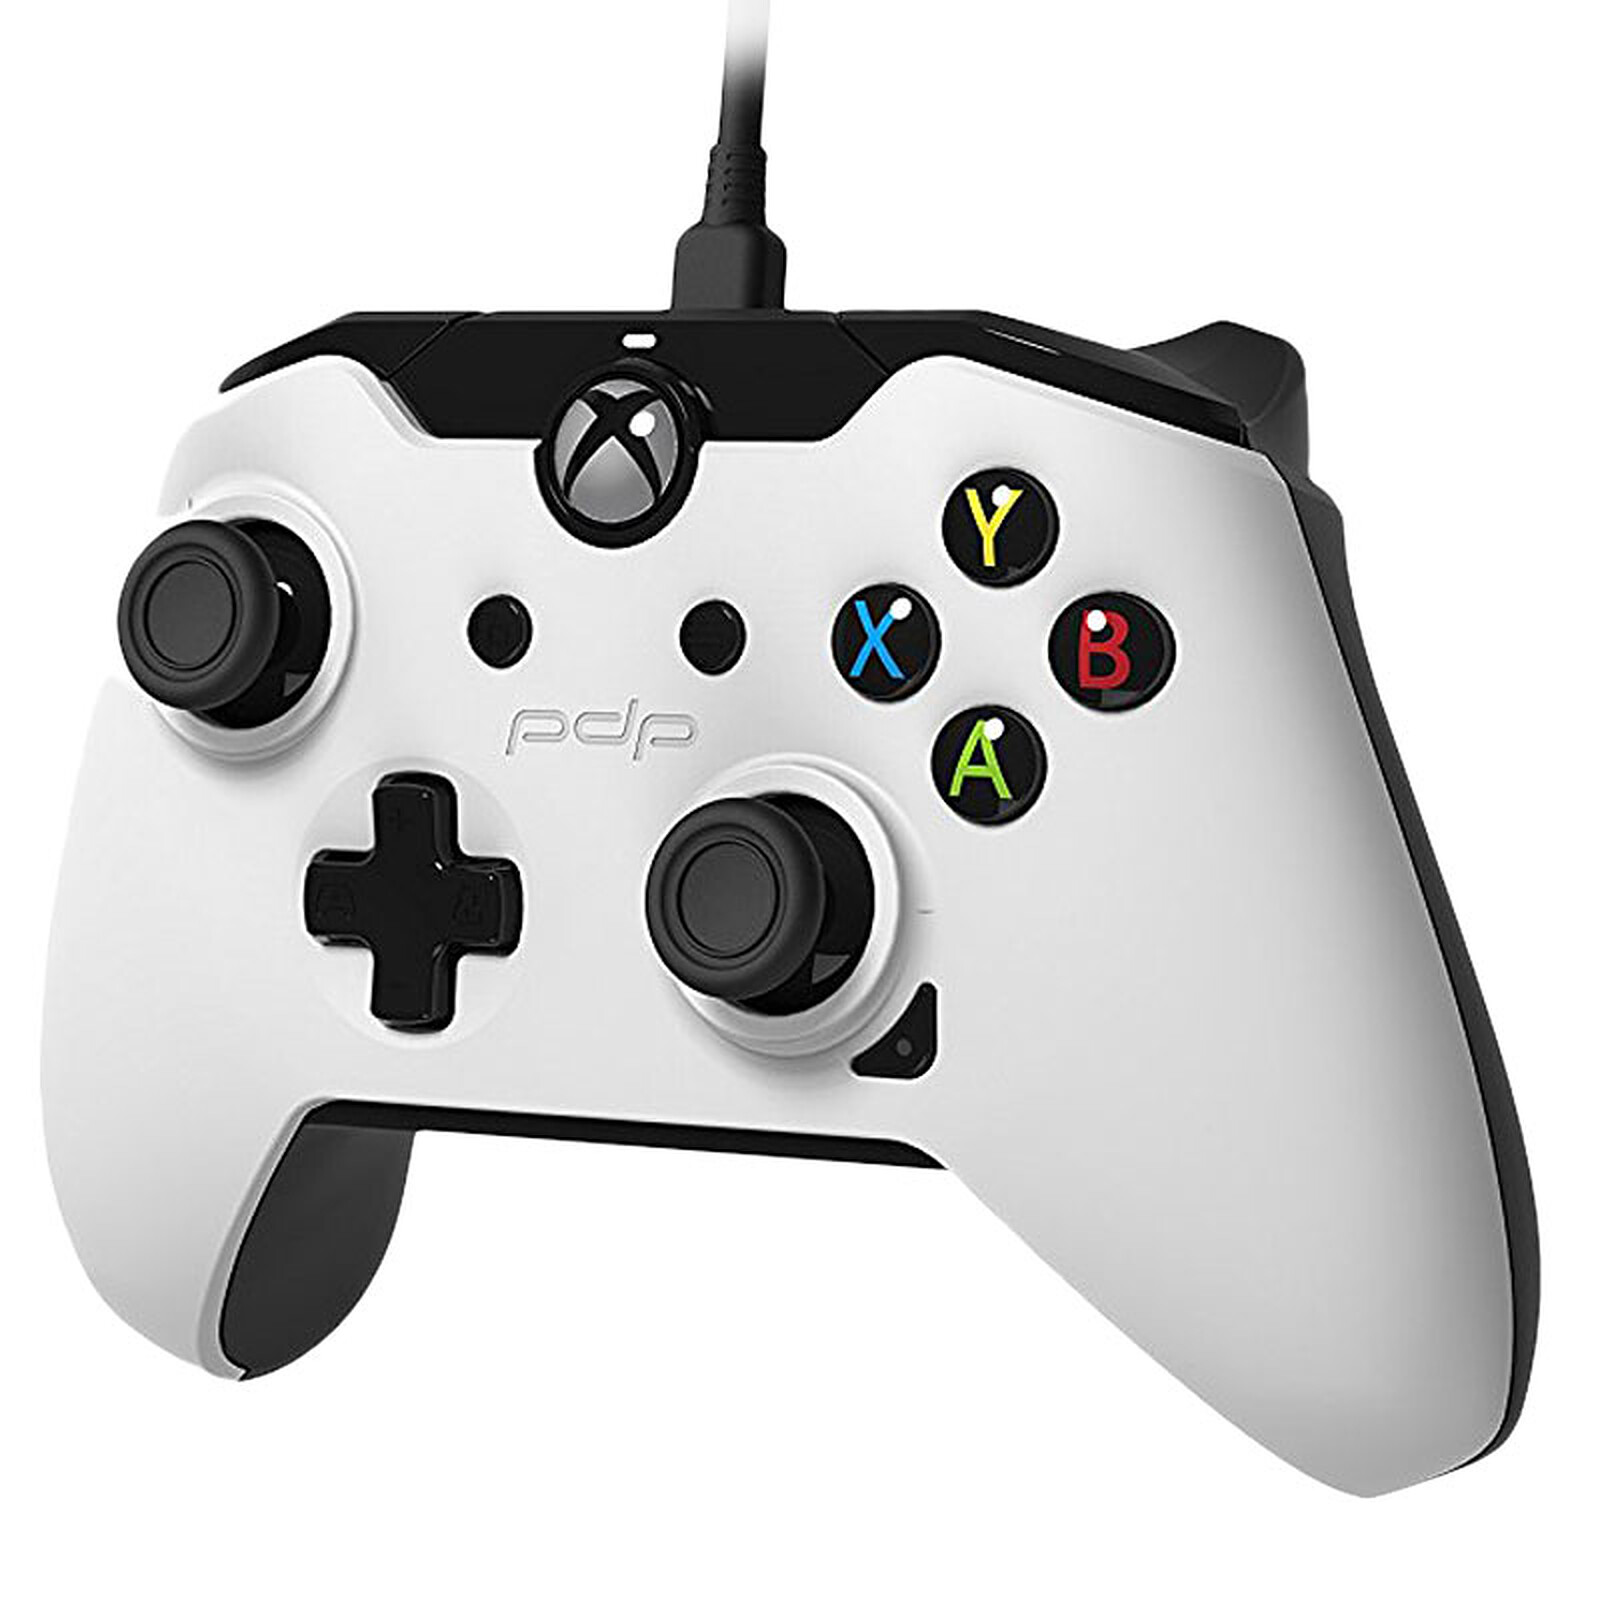 pdp wired controller for xbox one not working on pc